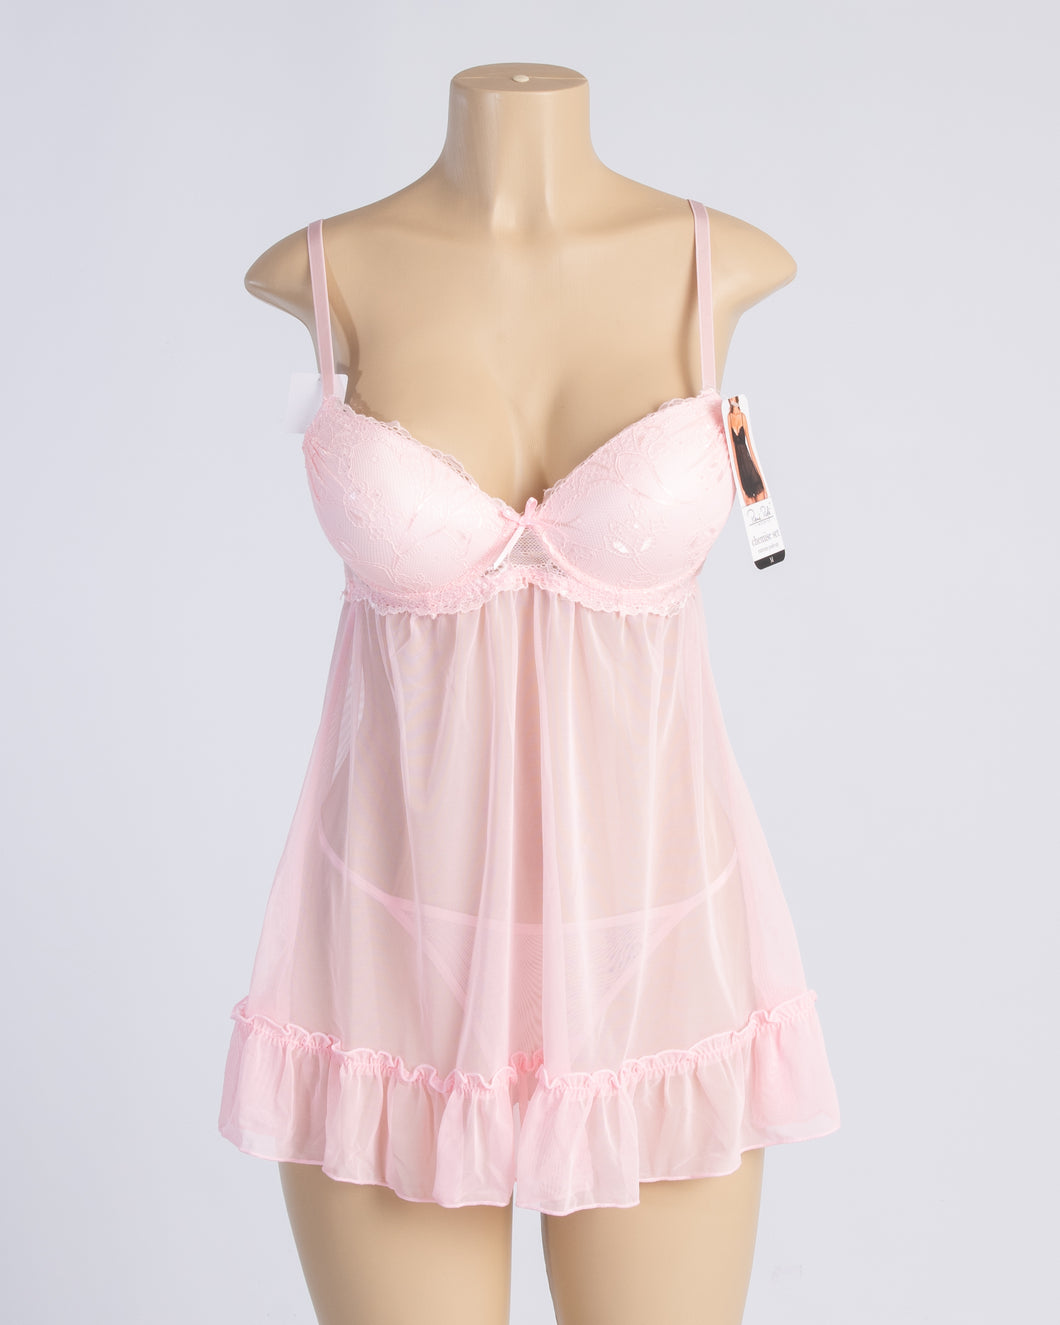 Red Carpet Ready Chemise with G-String